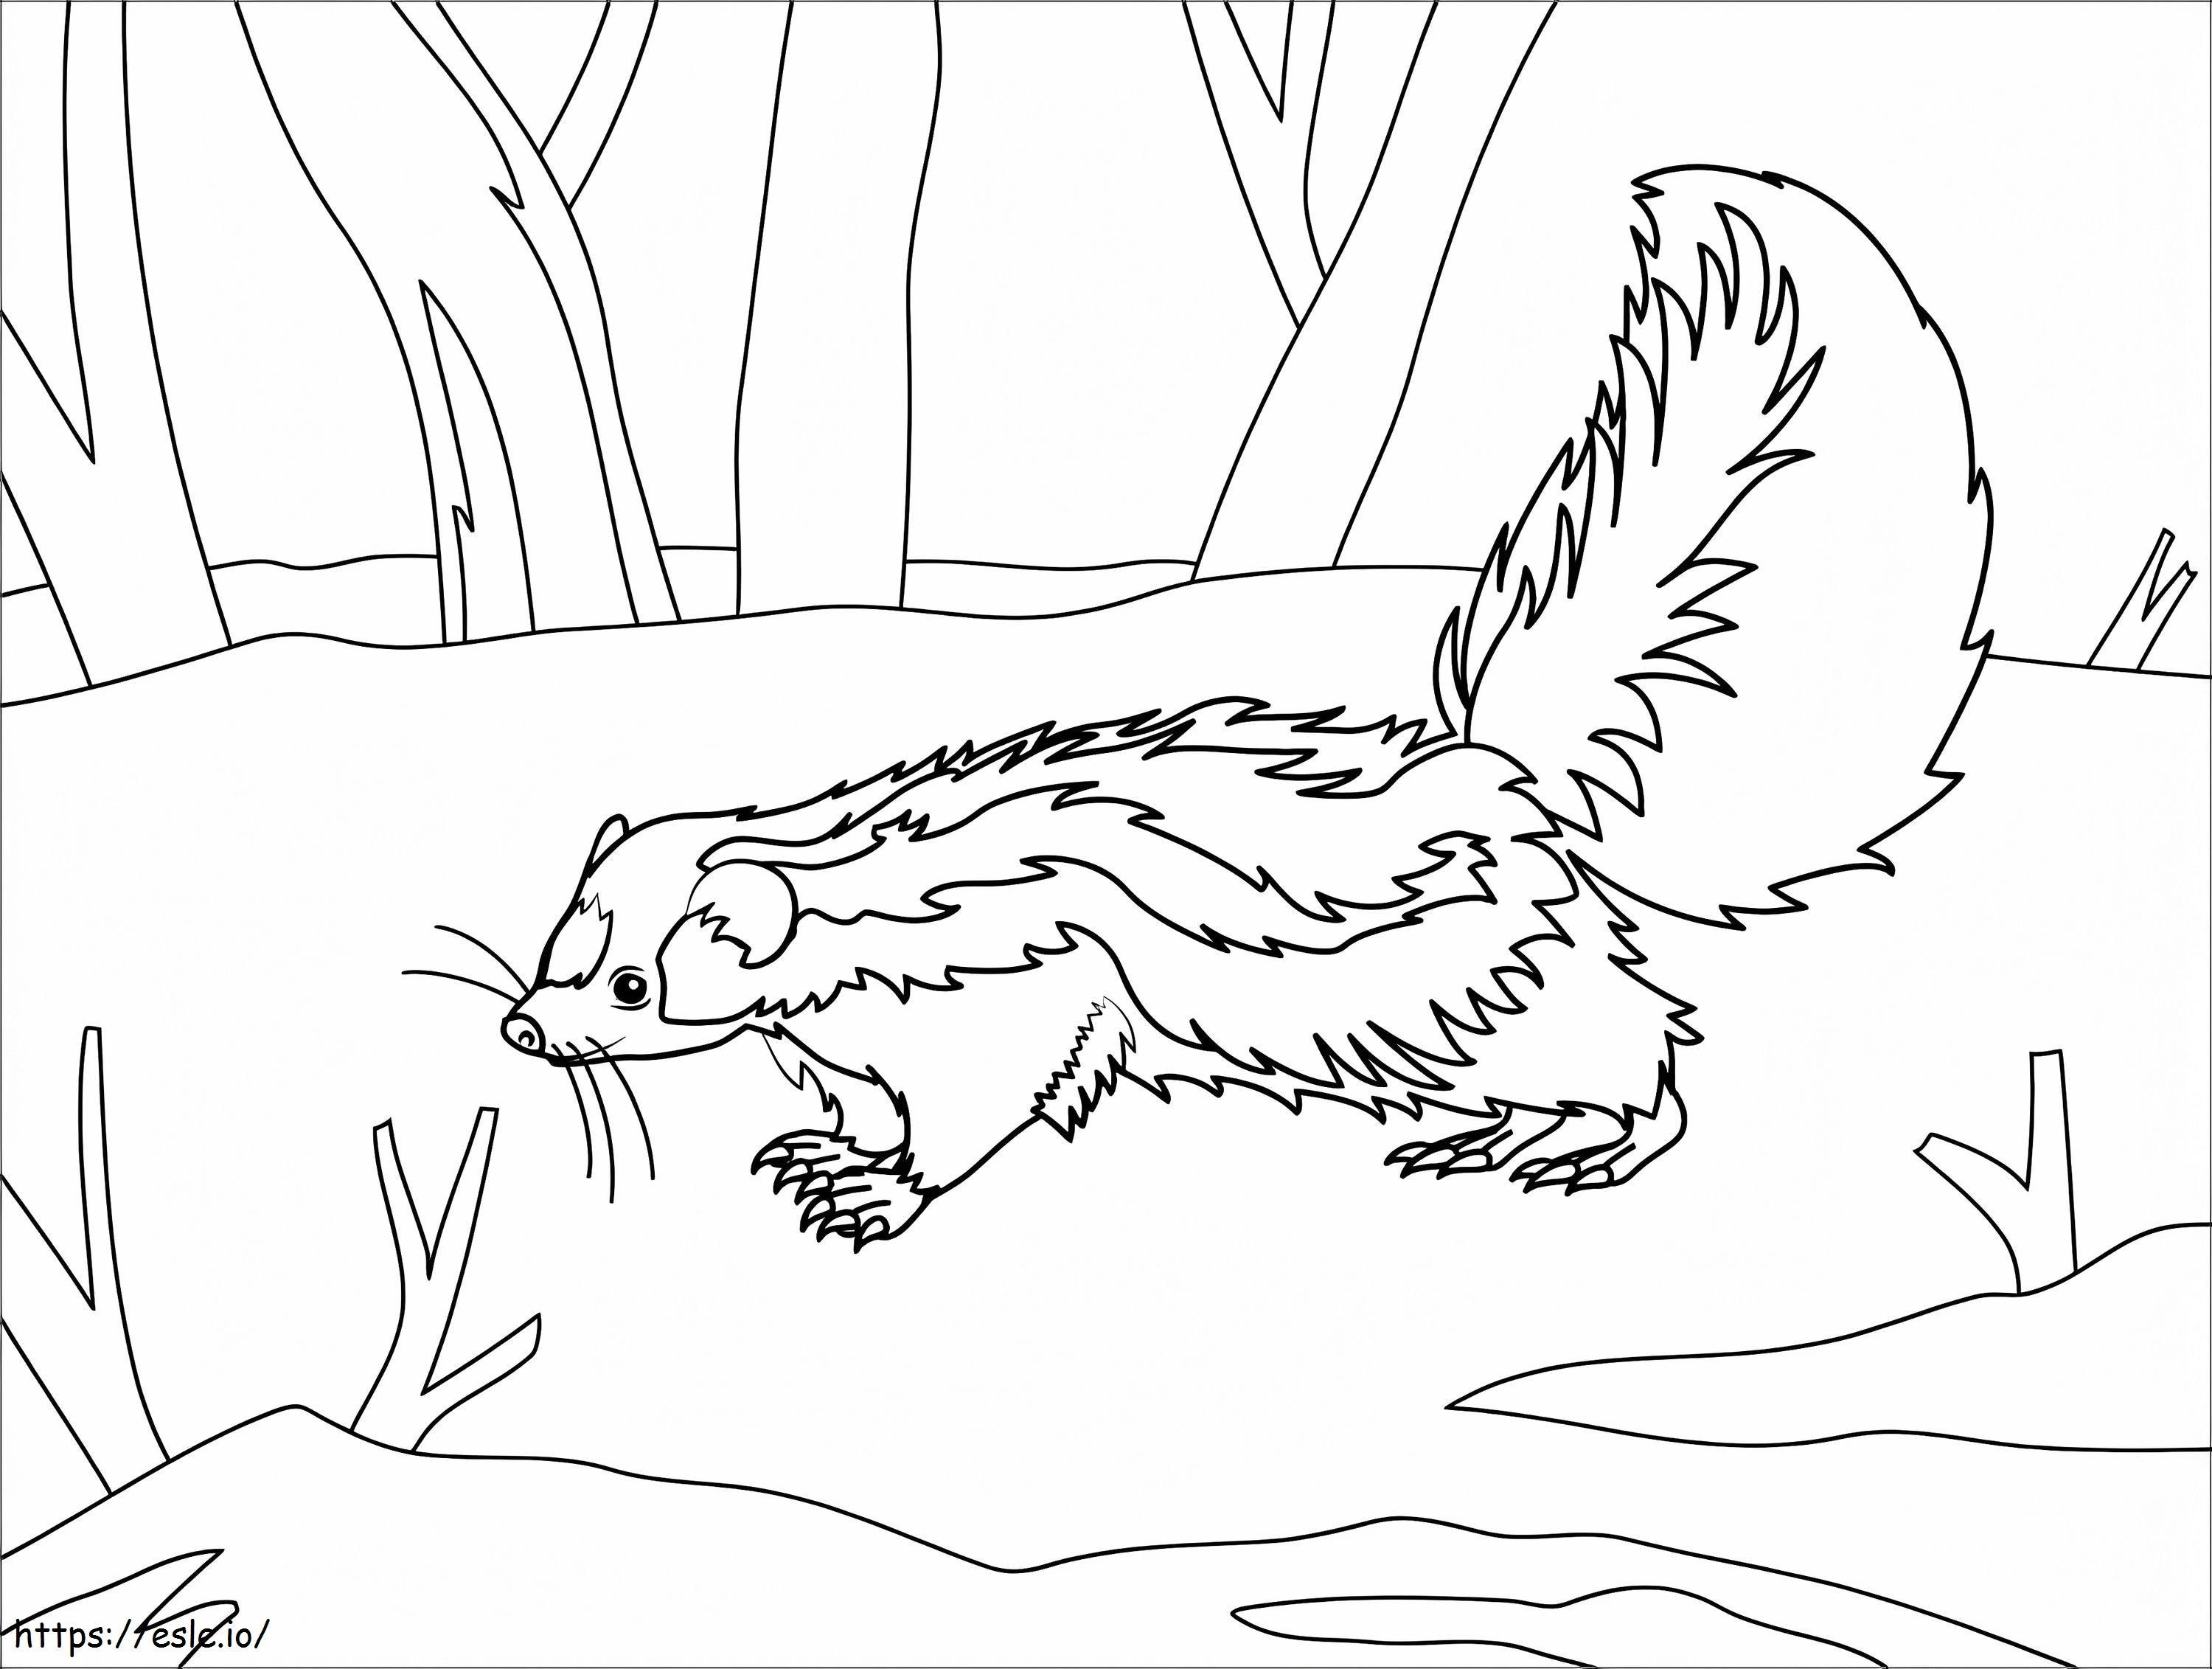 Skunk In The Forest coloring page